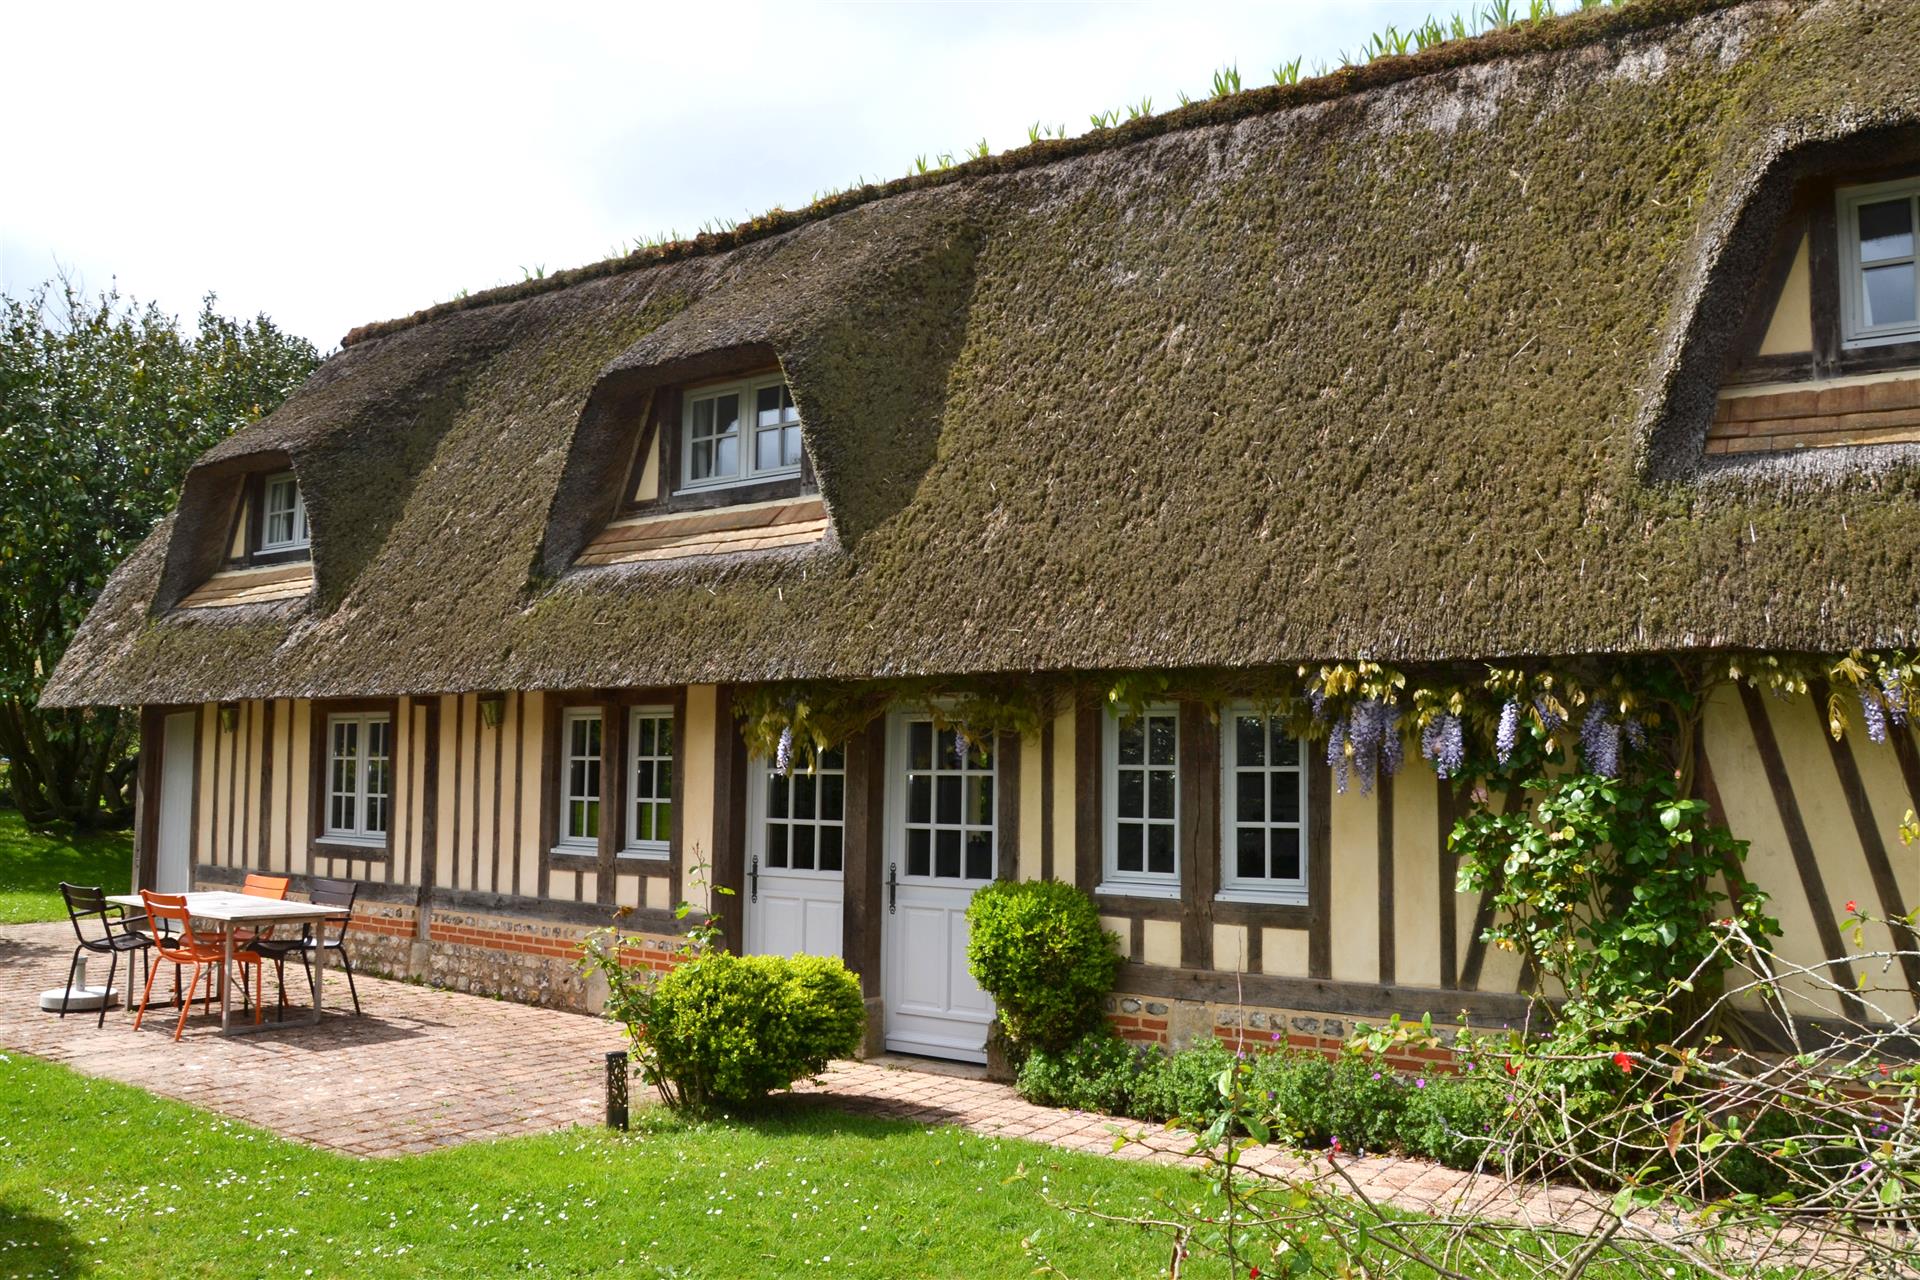 Restored thatched cottage near Veules les roses